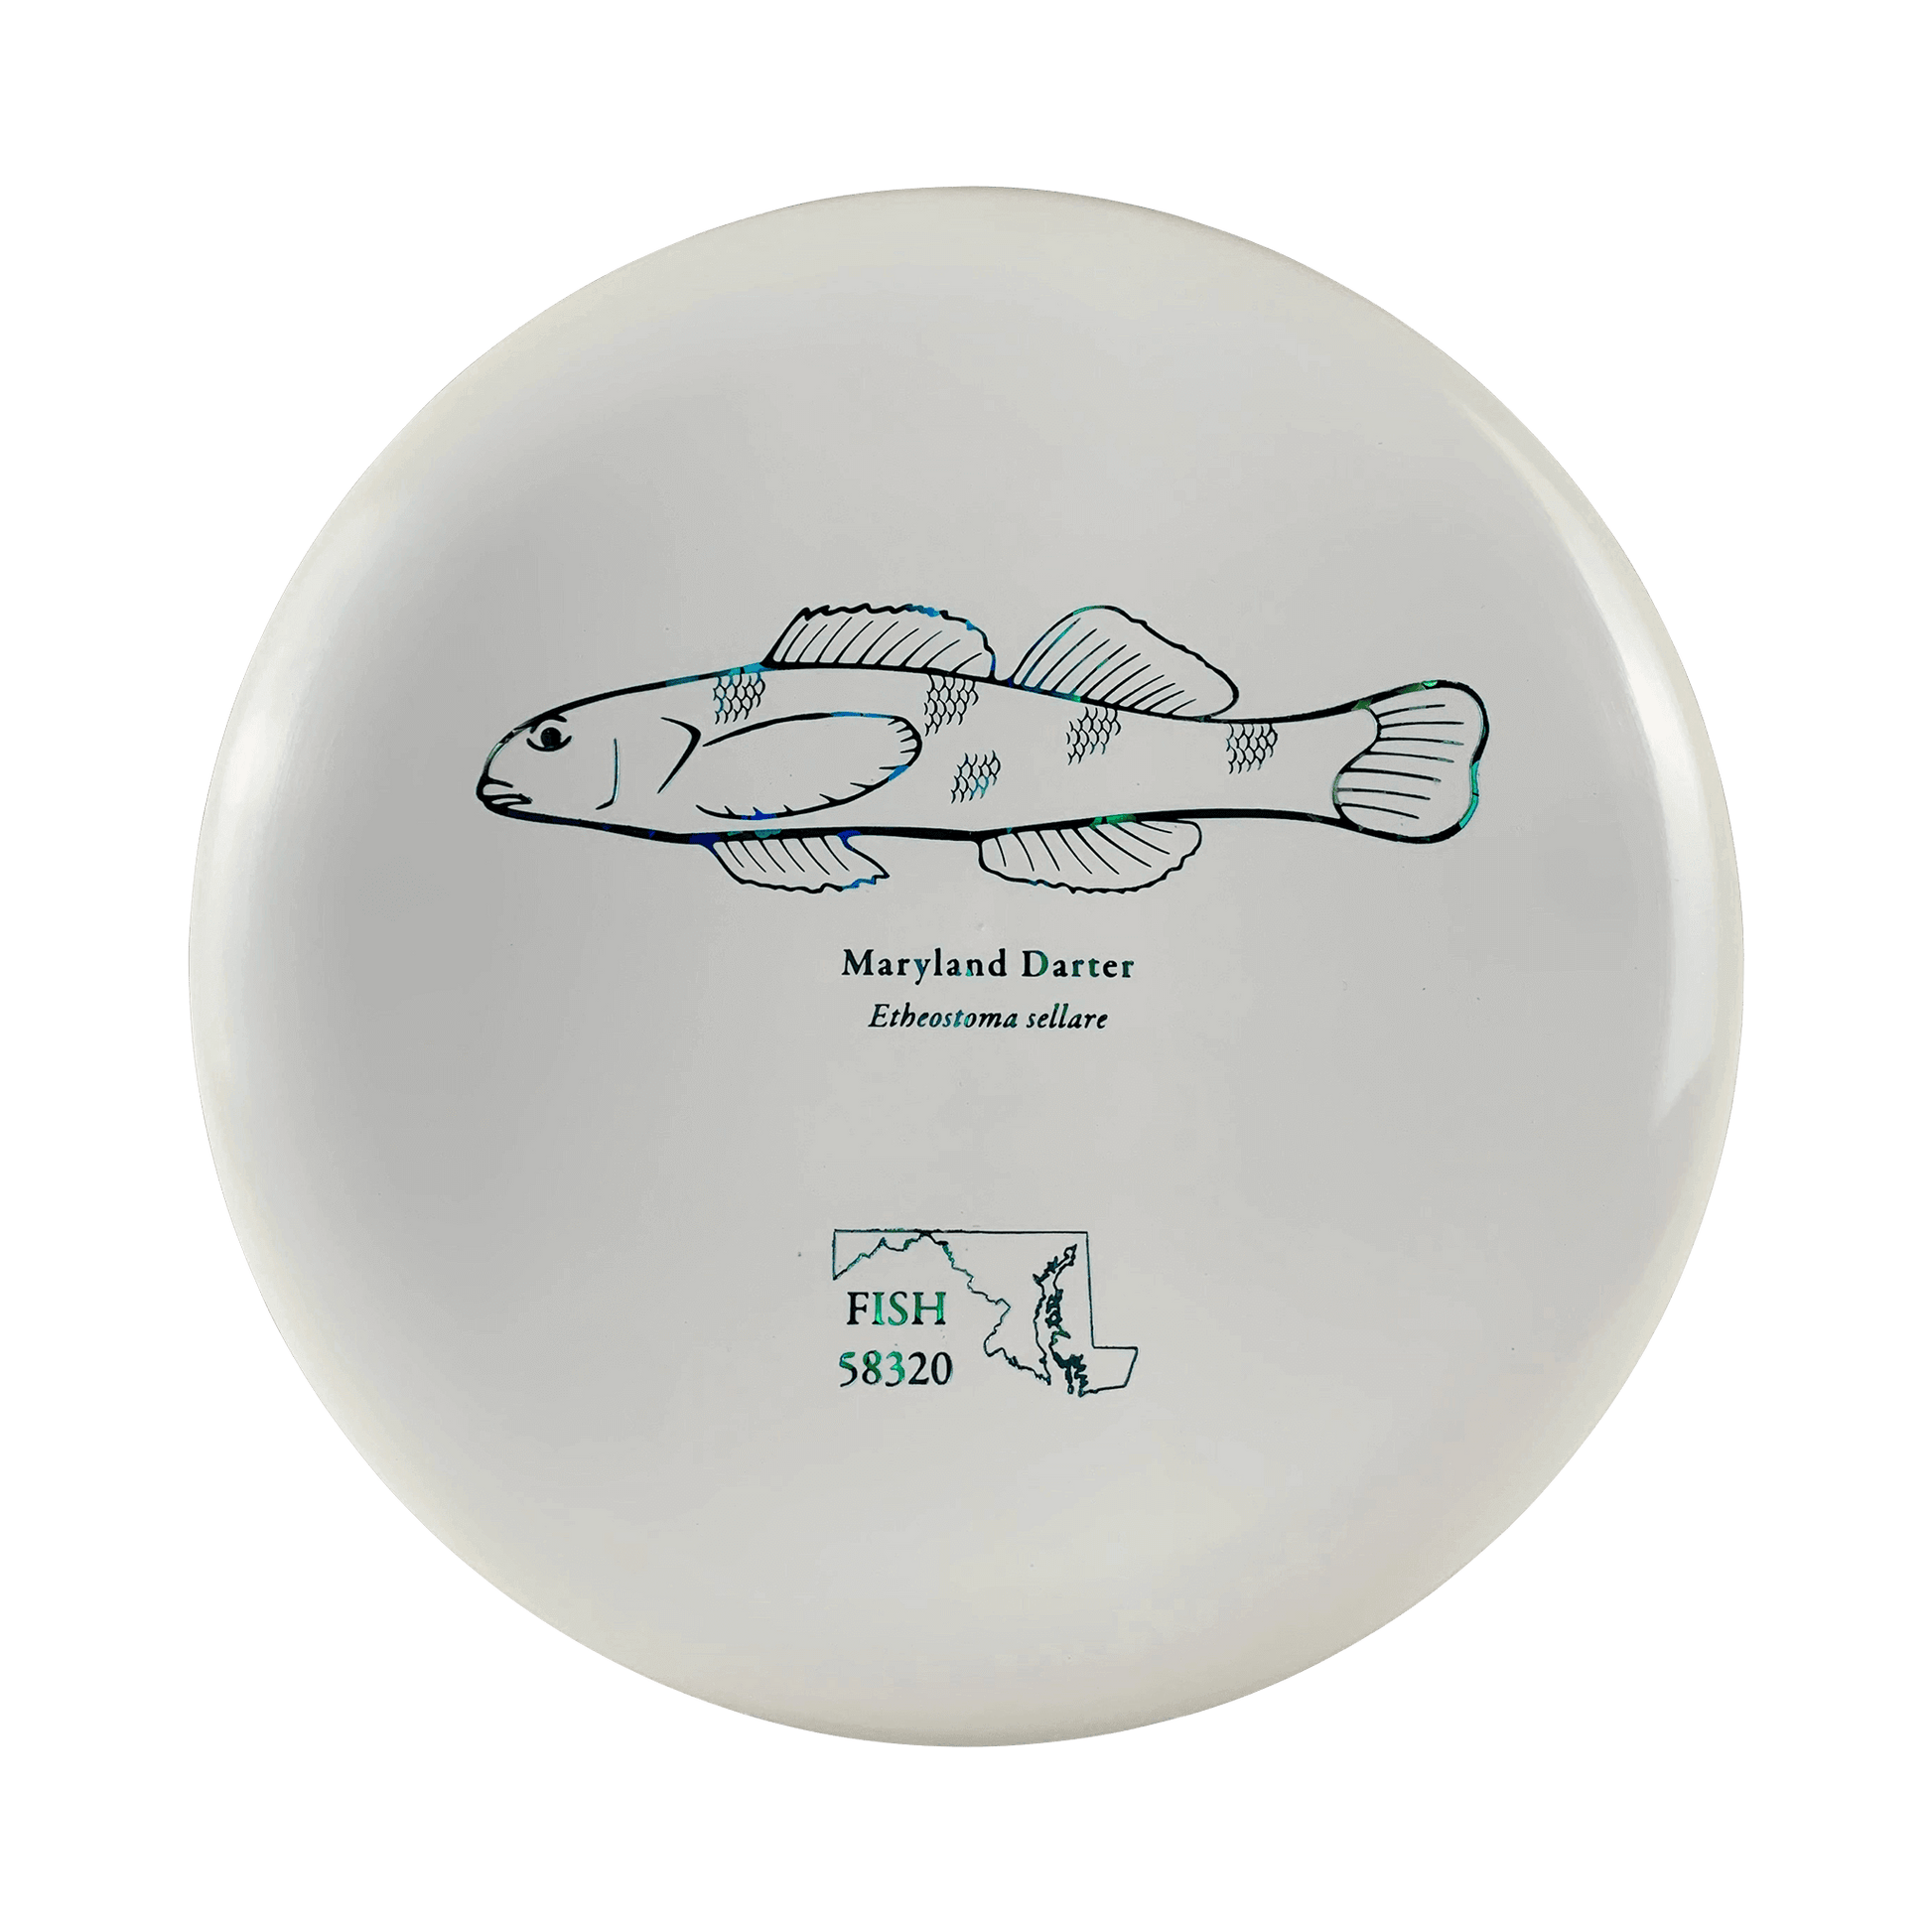 ESP Roach - Bottom Stamp Dyer's Edition Andrew Fish Maryland Darter Stamp Disc Discraft white 173 